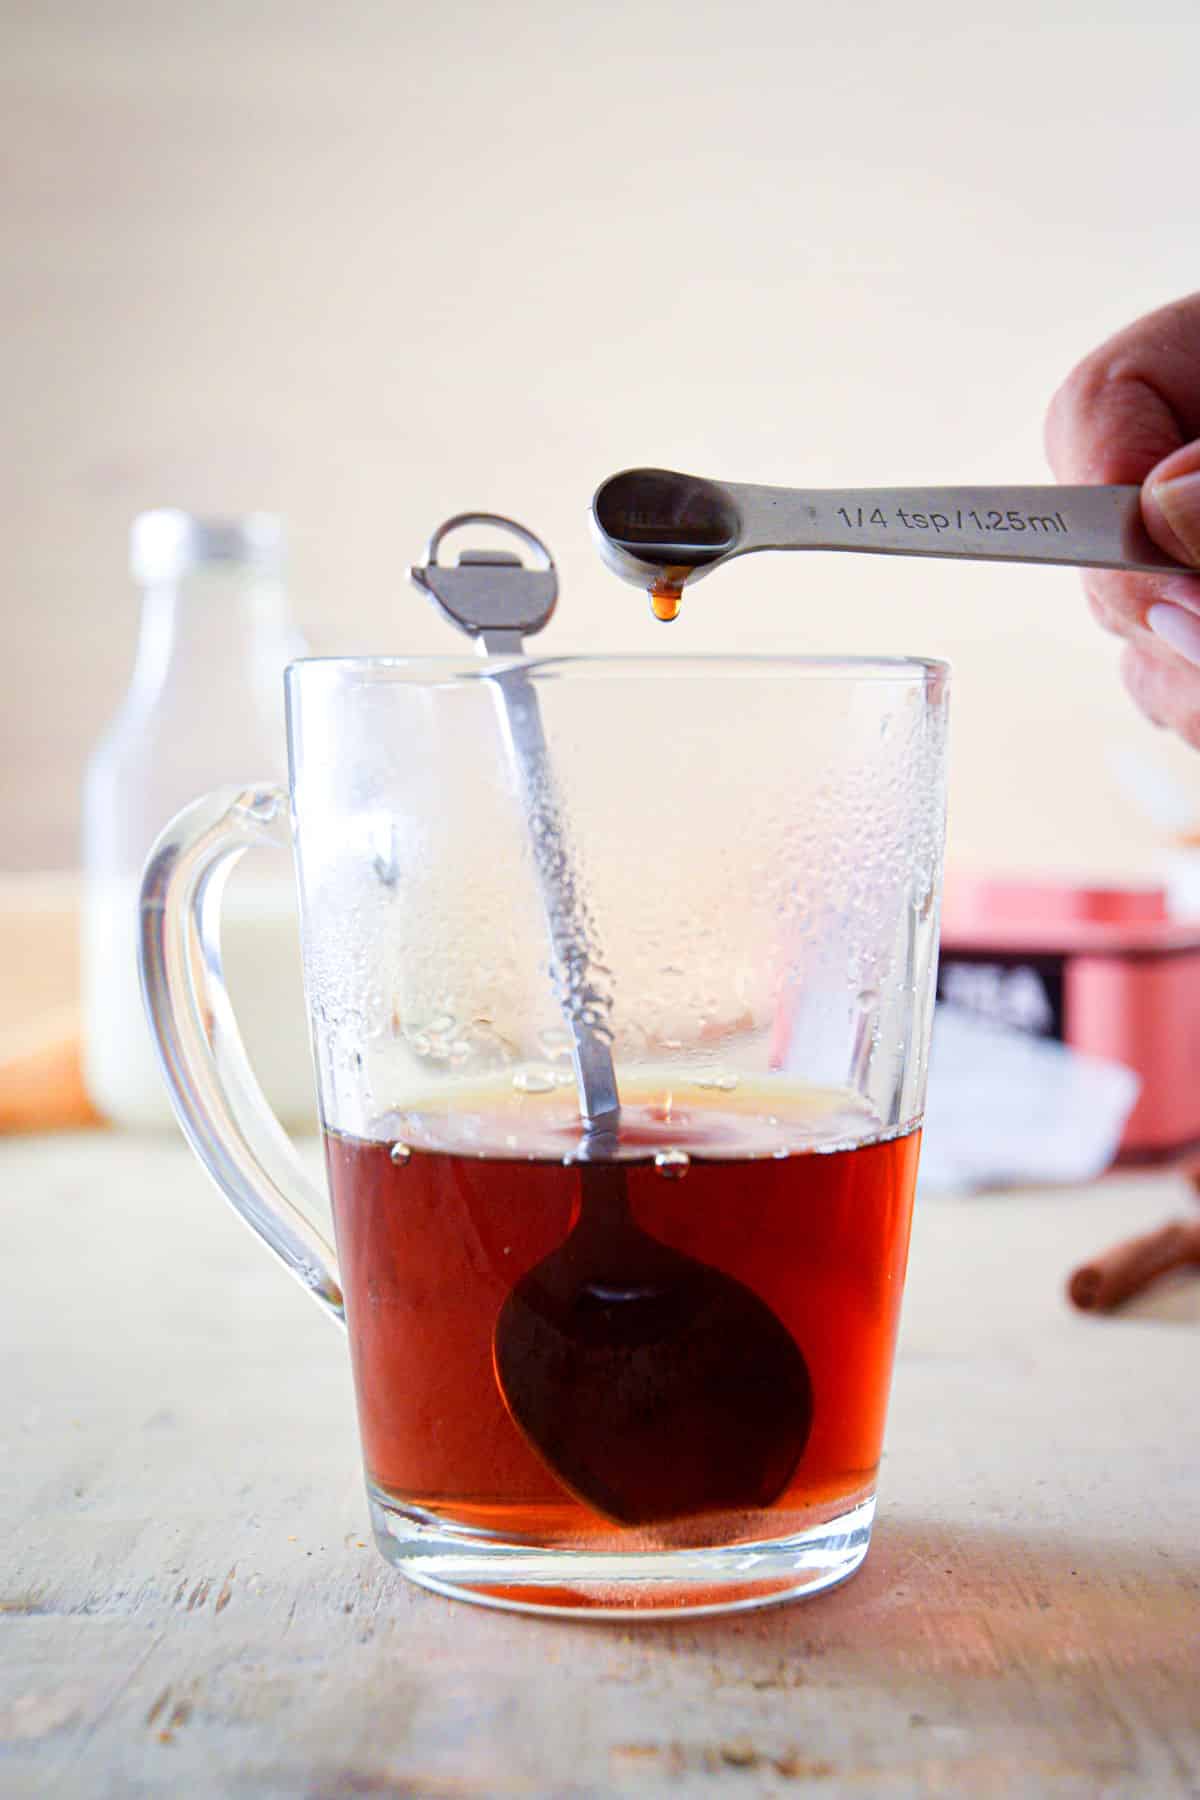 A clear glass mug with Earl Grey tea and vanilla extract.